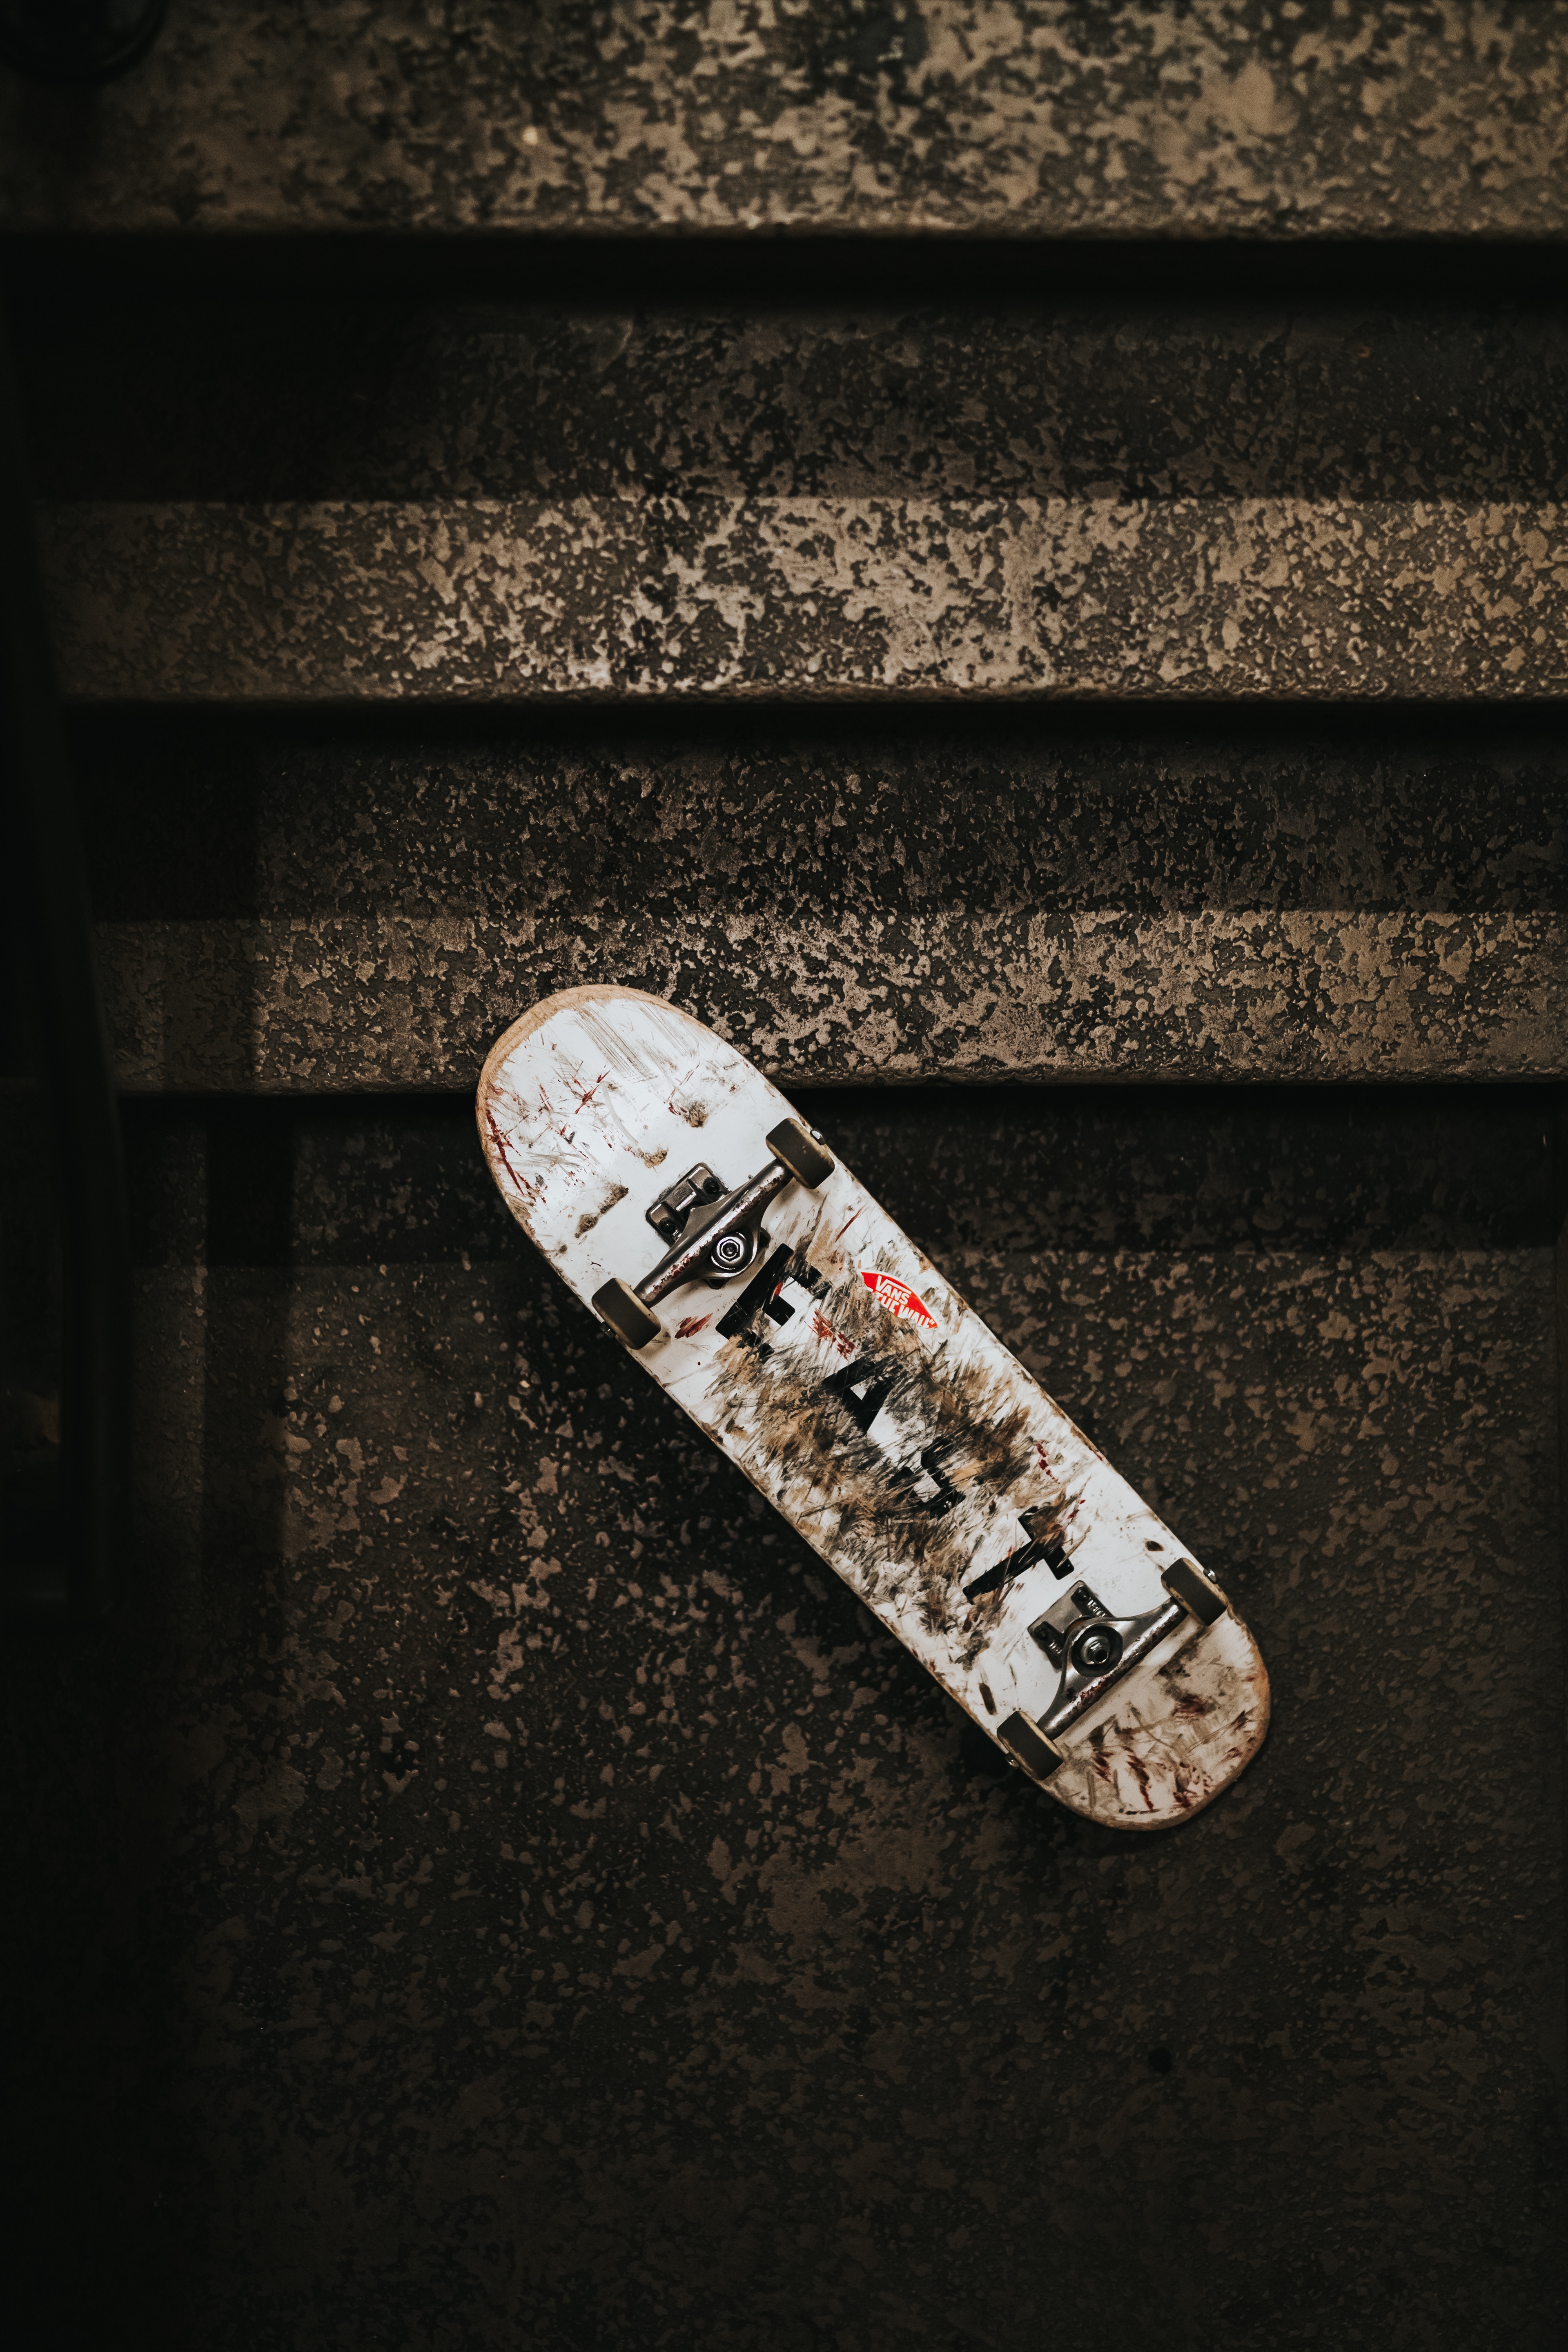 sports, lost, stairs, ladder, shabby, skateboard, wheels, dirty High Definition image